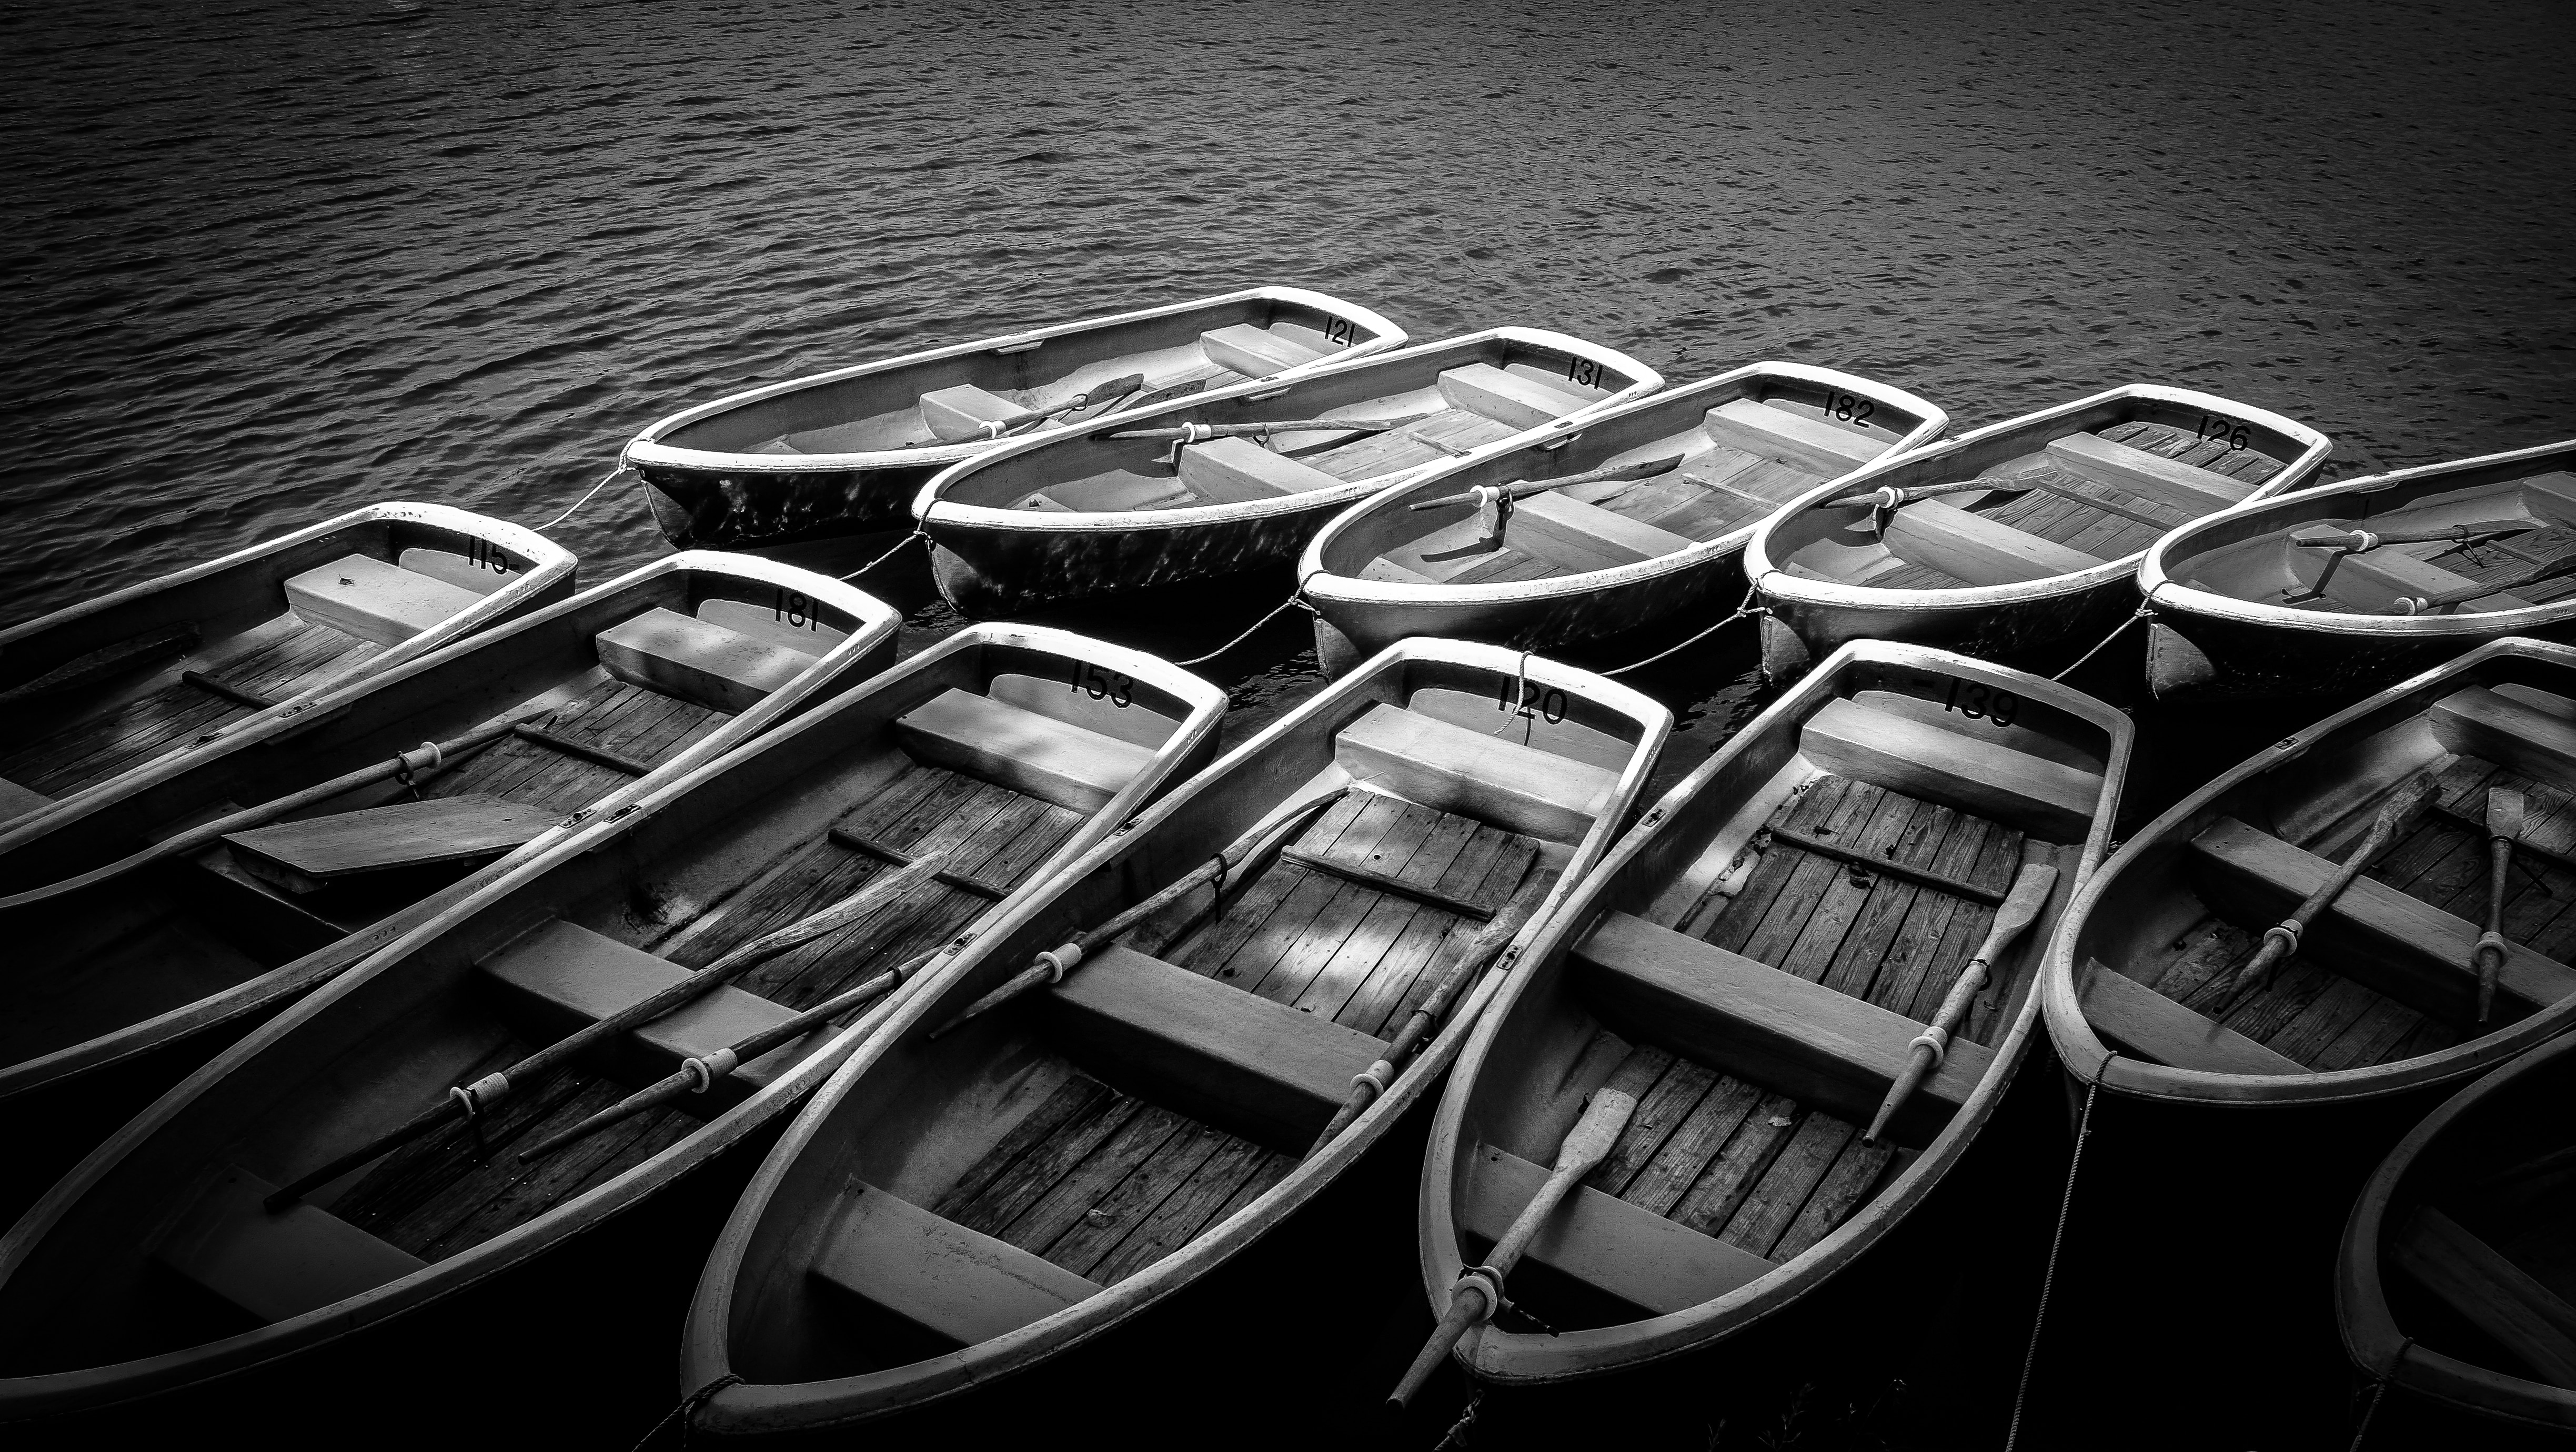 greyscale photo of row boats on body of water